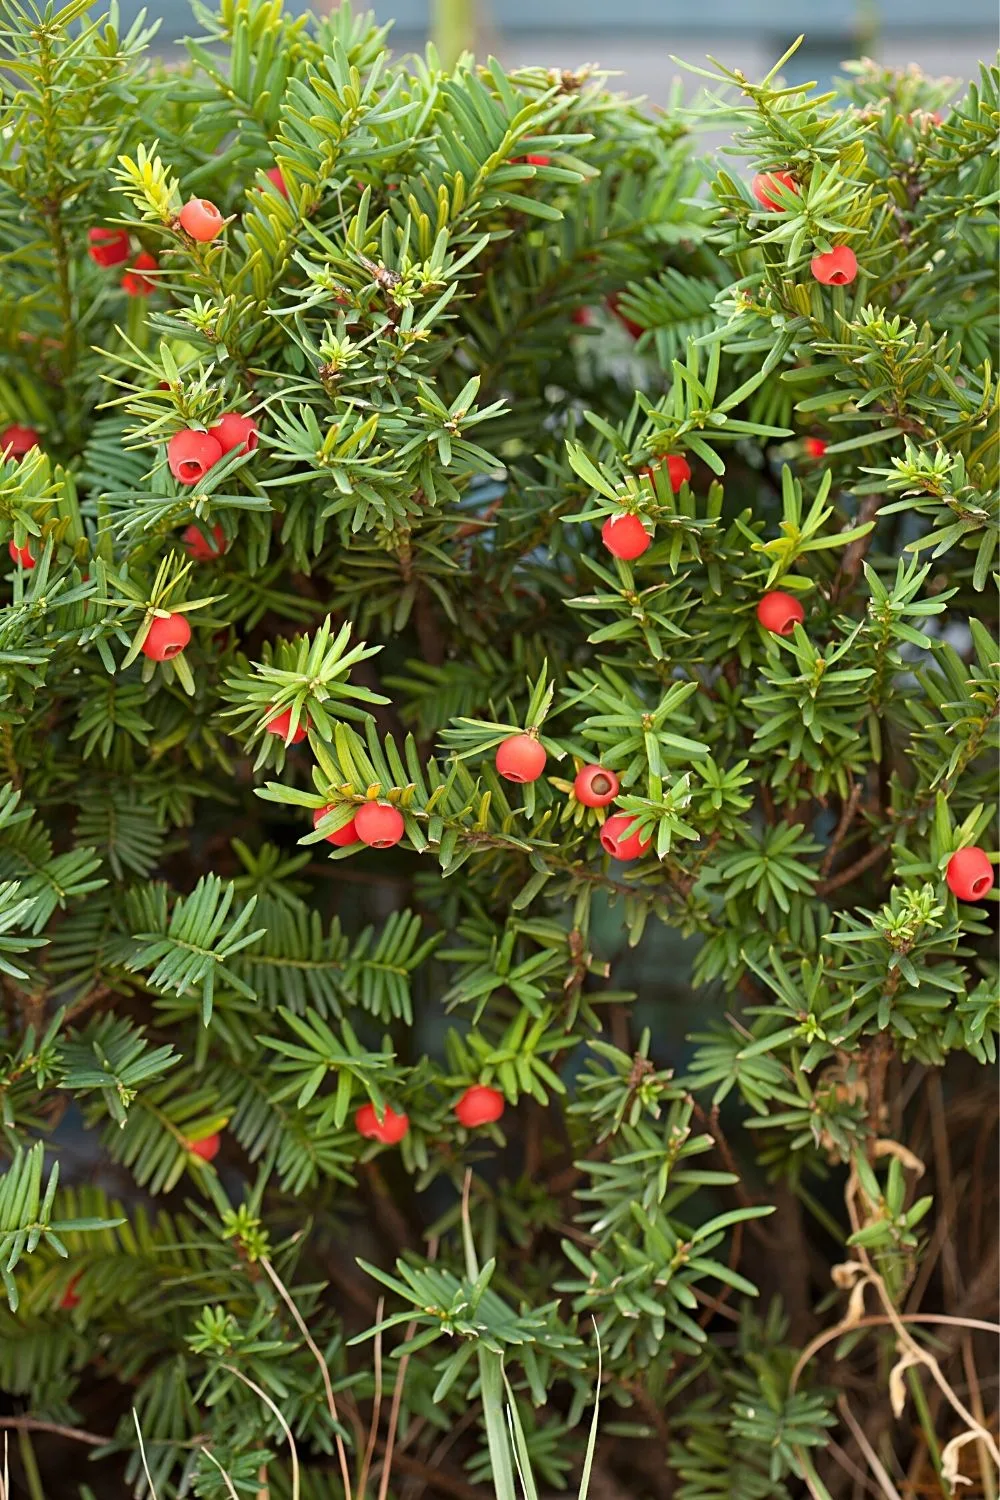 Yew is a non-flowering plant that you can grow on your north-facing balcony